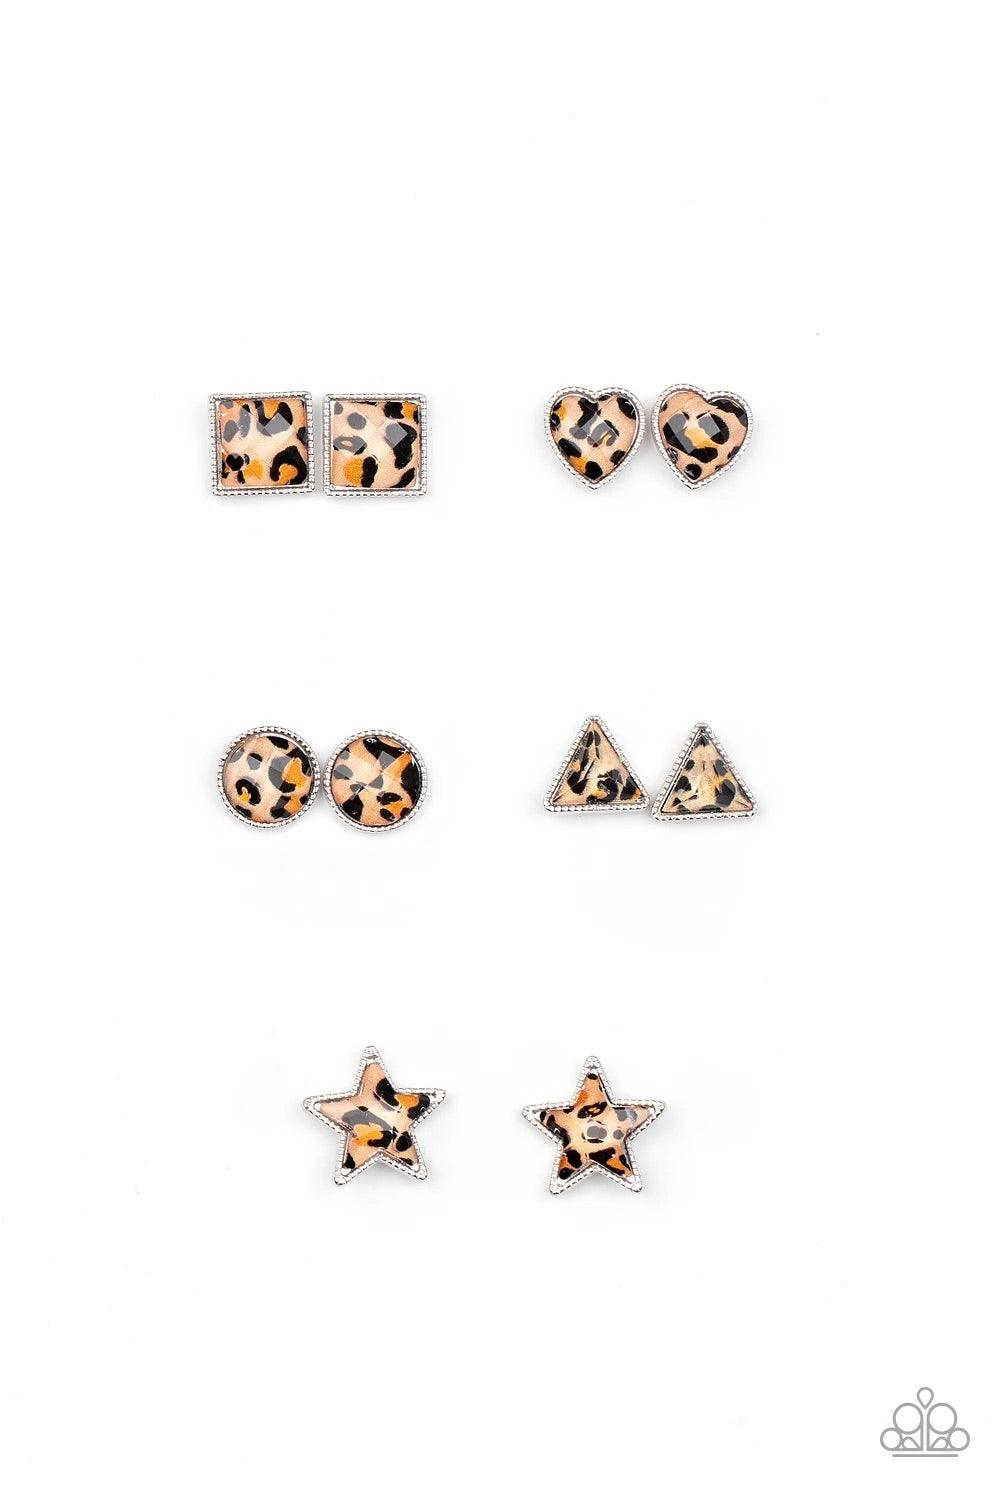 Paparazzi Accessories Starlet Shimmer Earrings: #19 Square Jewelry